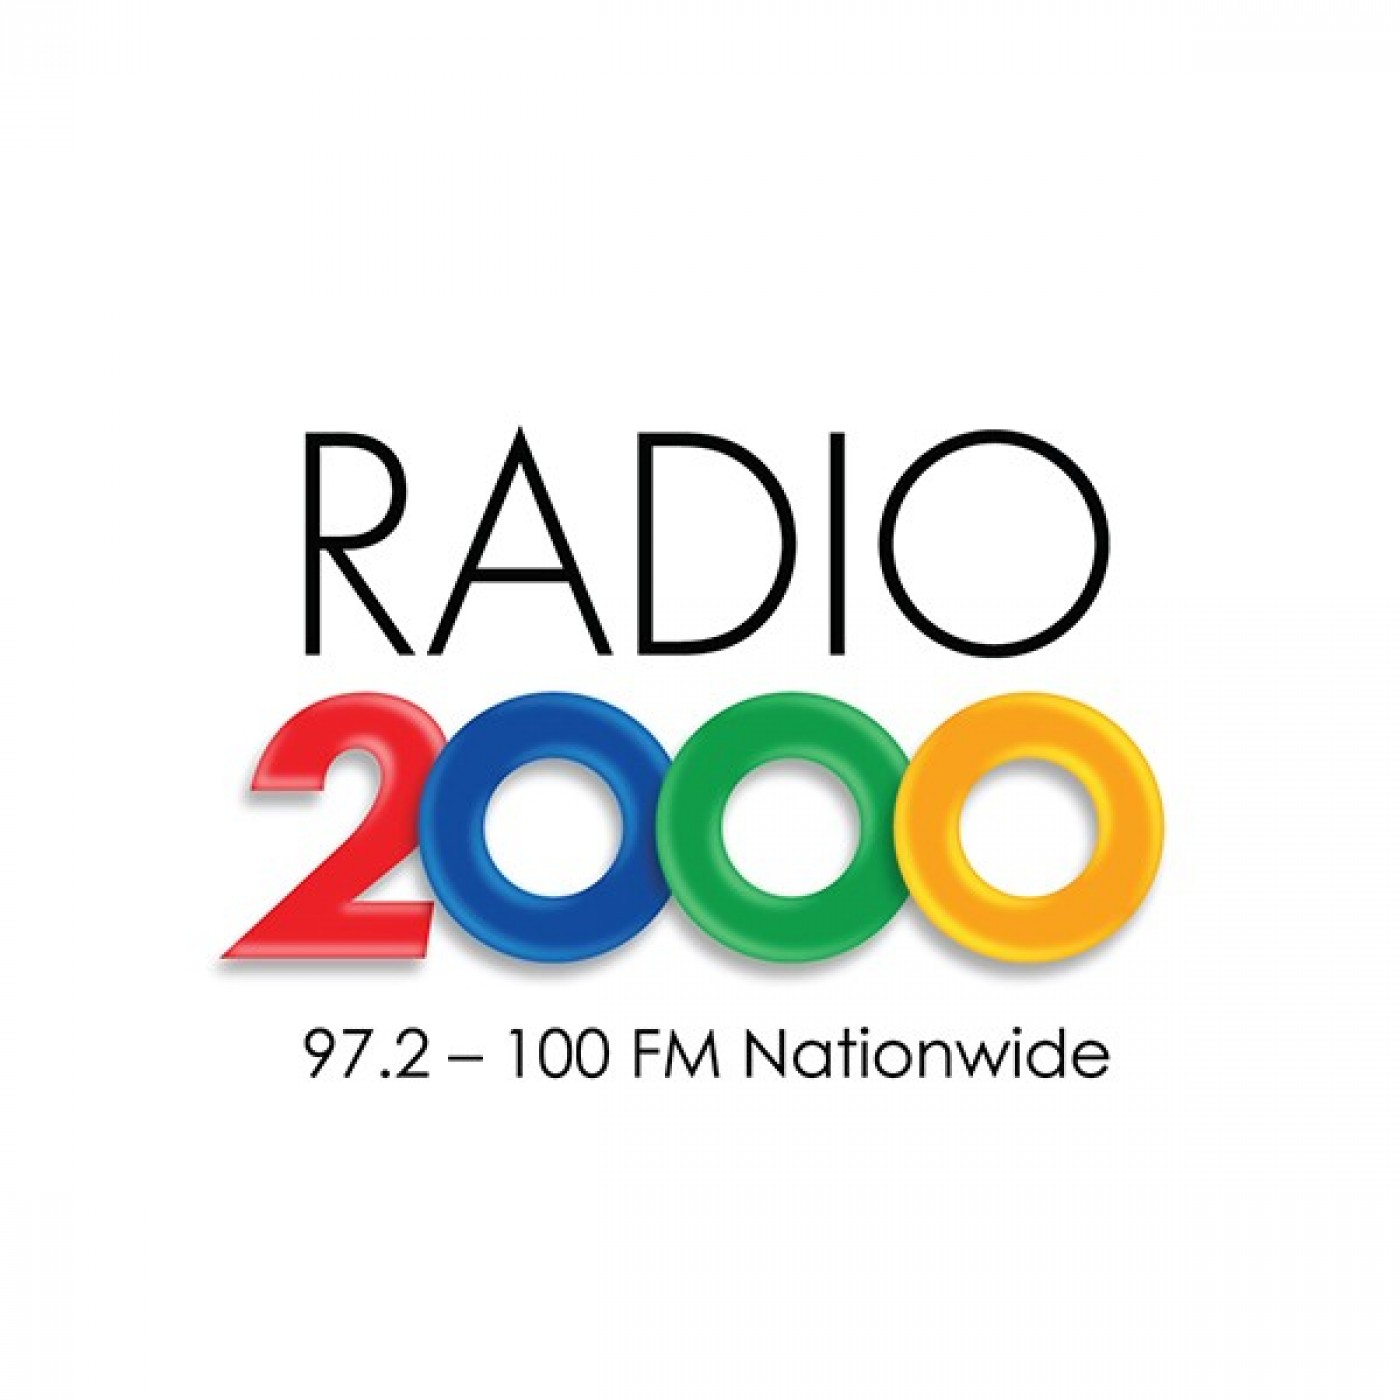 RADIO 2000 IN THE MIX #AIMNOT2SWEAT BY DJ MILES 29-05-2020 22H00-22H20